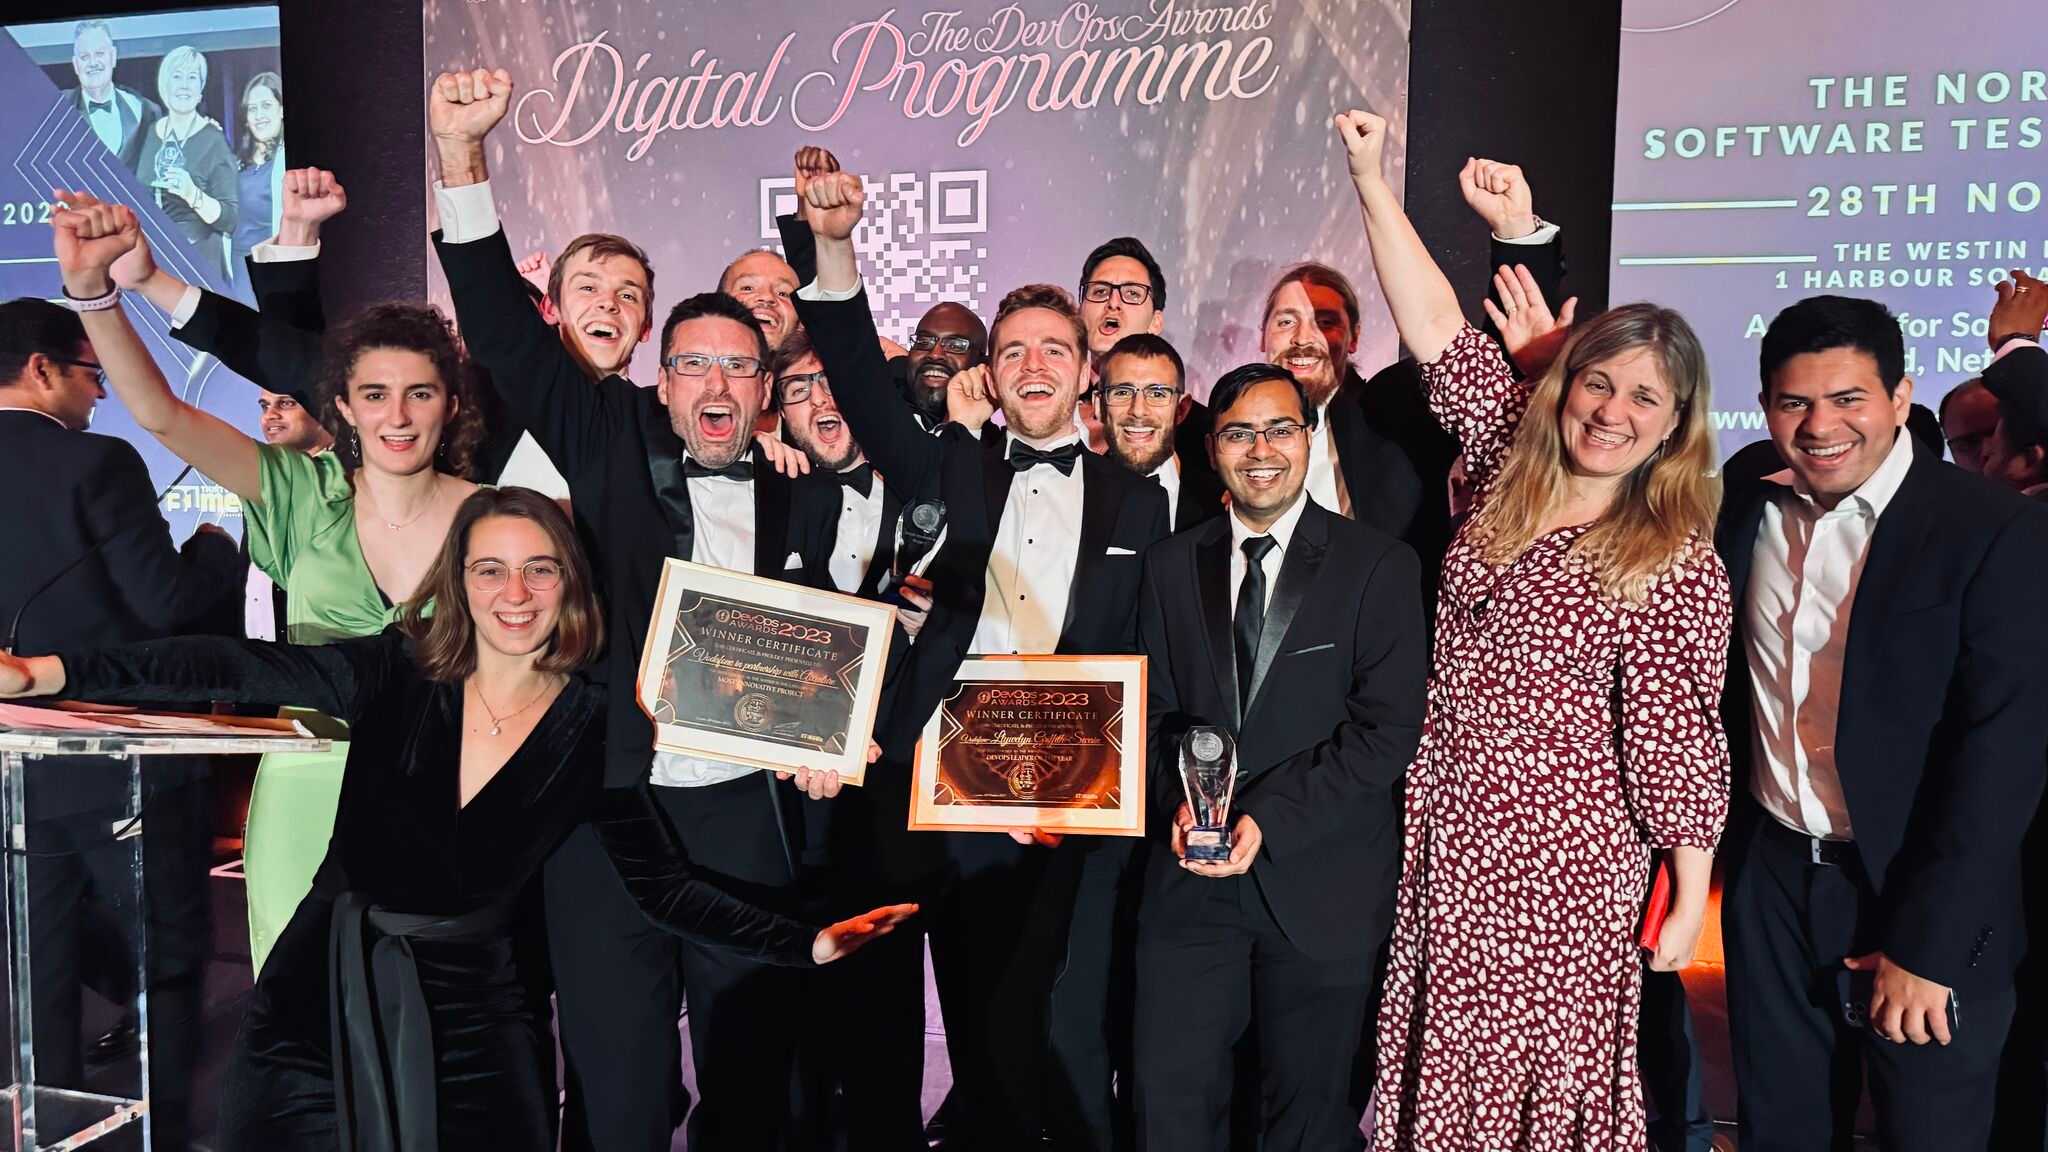 me and the team on stage having won some silly awards